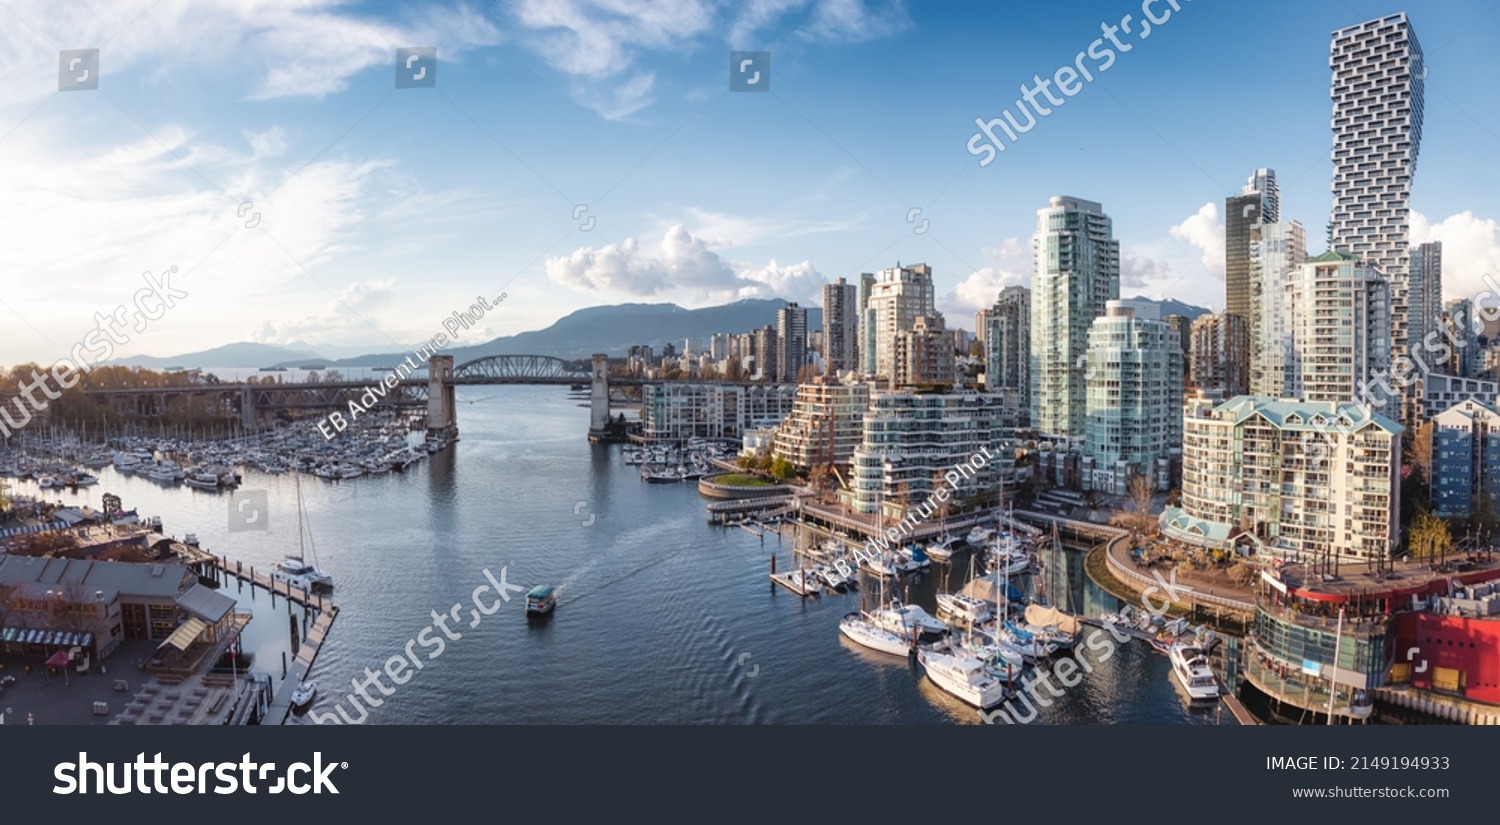 Panoramic Aerial View of Granville Island in False Creek with modern city skyline and mountains in background. Downtown Vancouver, British Columbia, Canada. #2149194933